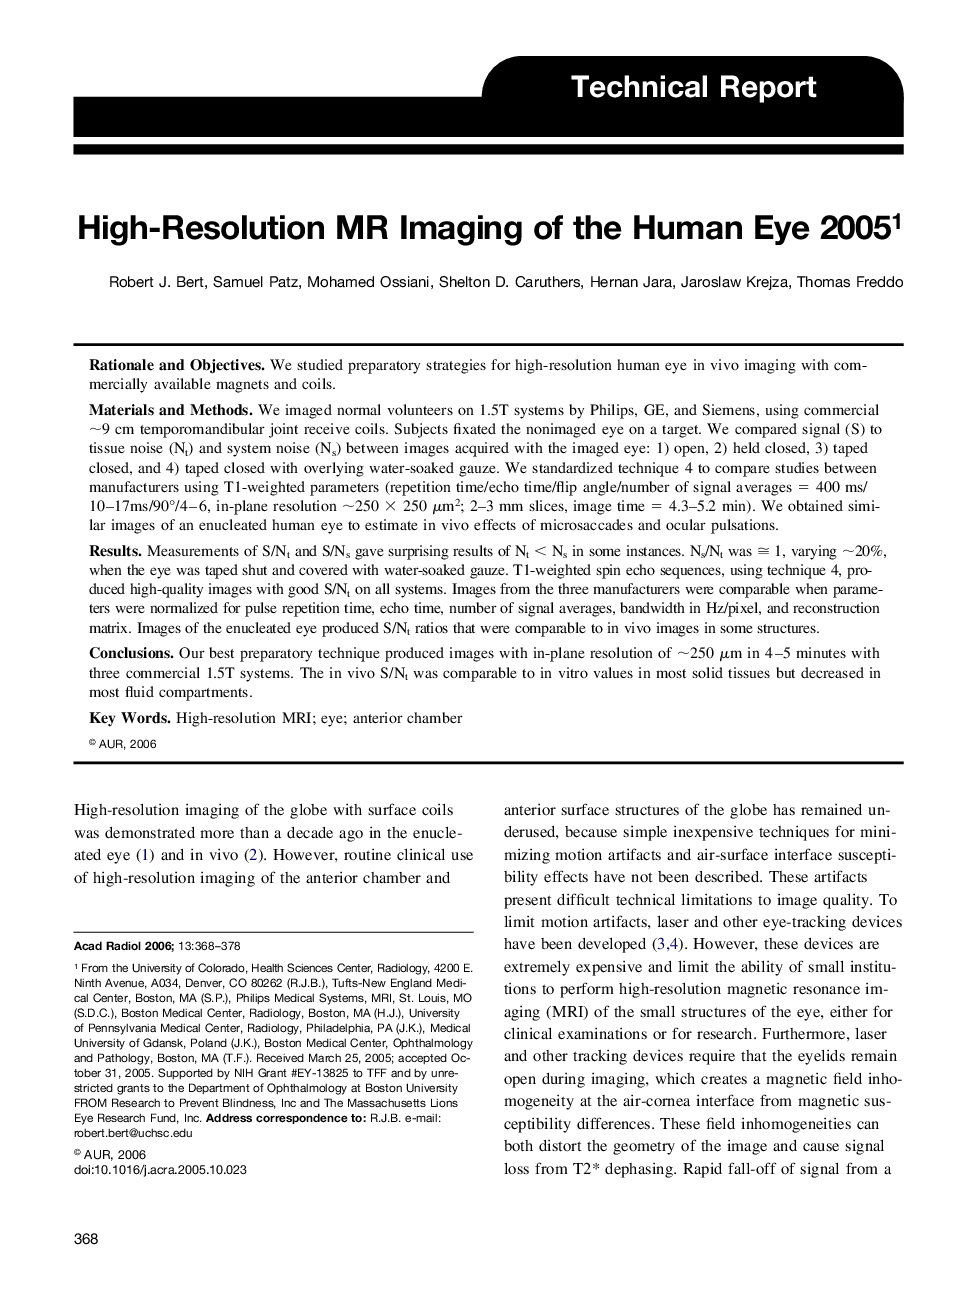 High-Resolution MR Imaging of the Human Eye 2005